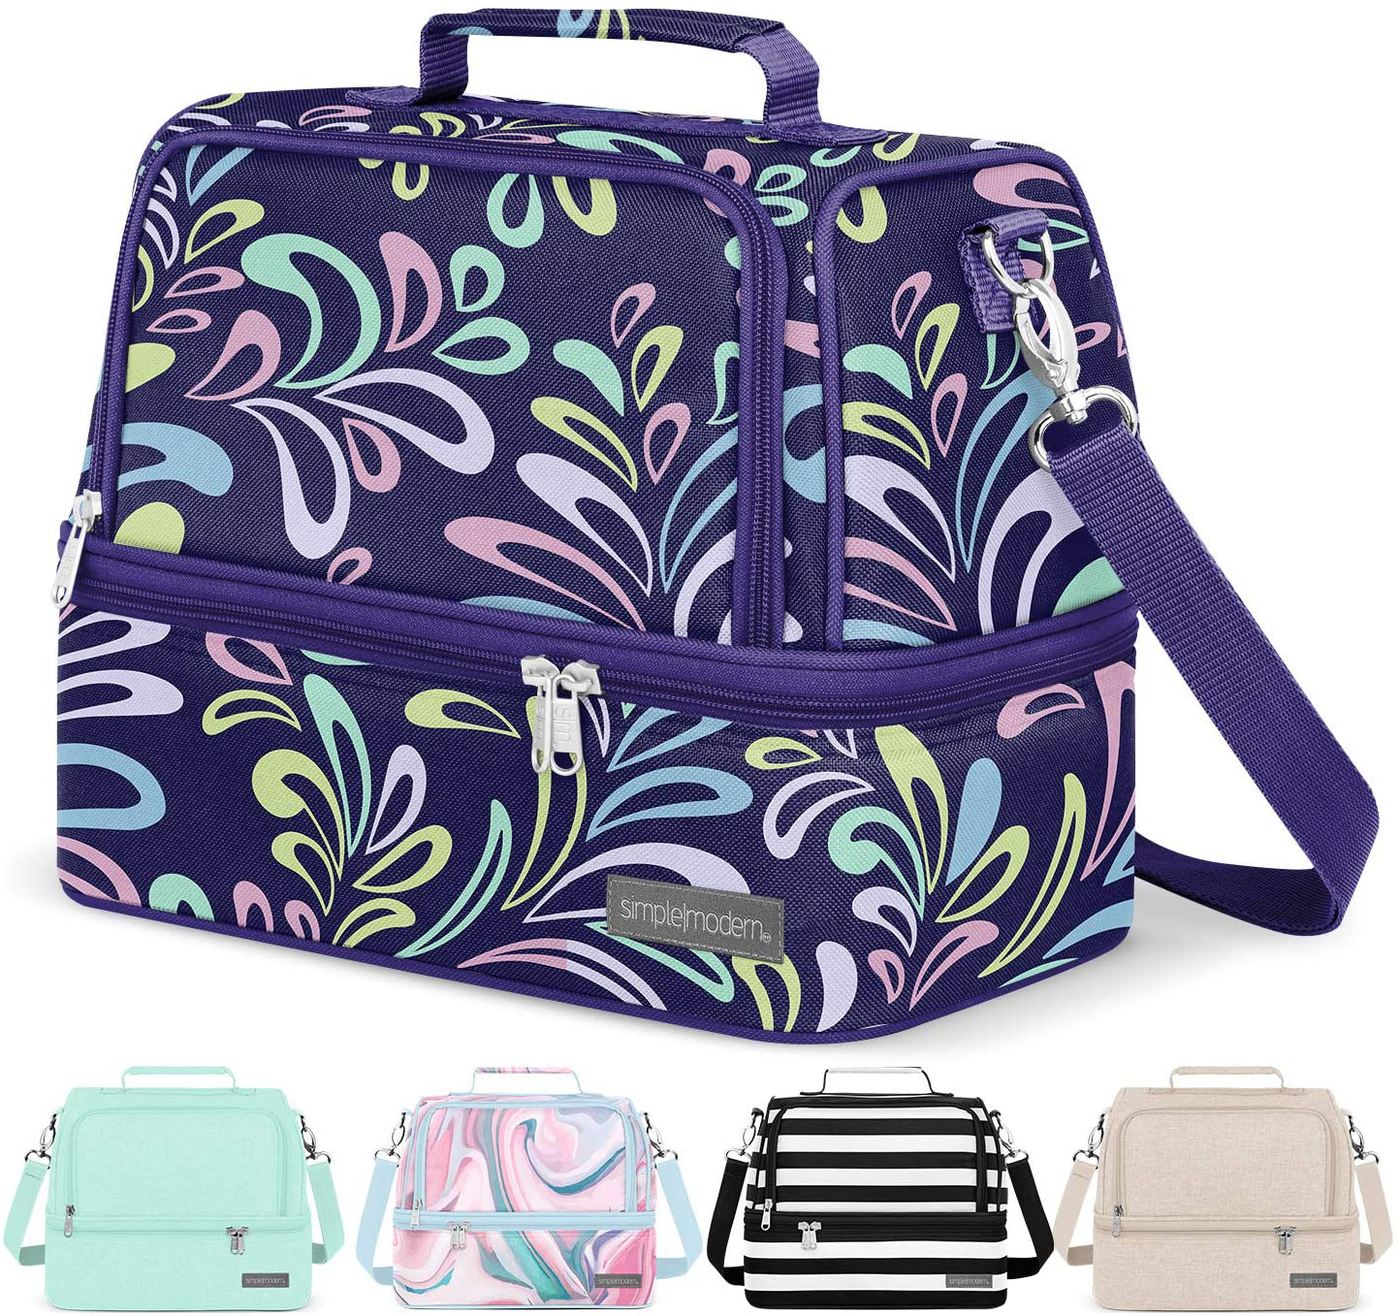 Simple Modern Insulated Lunch Bag Box Reusable Tote-Adult Meal Container for Women, Men, Work, 8L Myriad, Floral Swirl